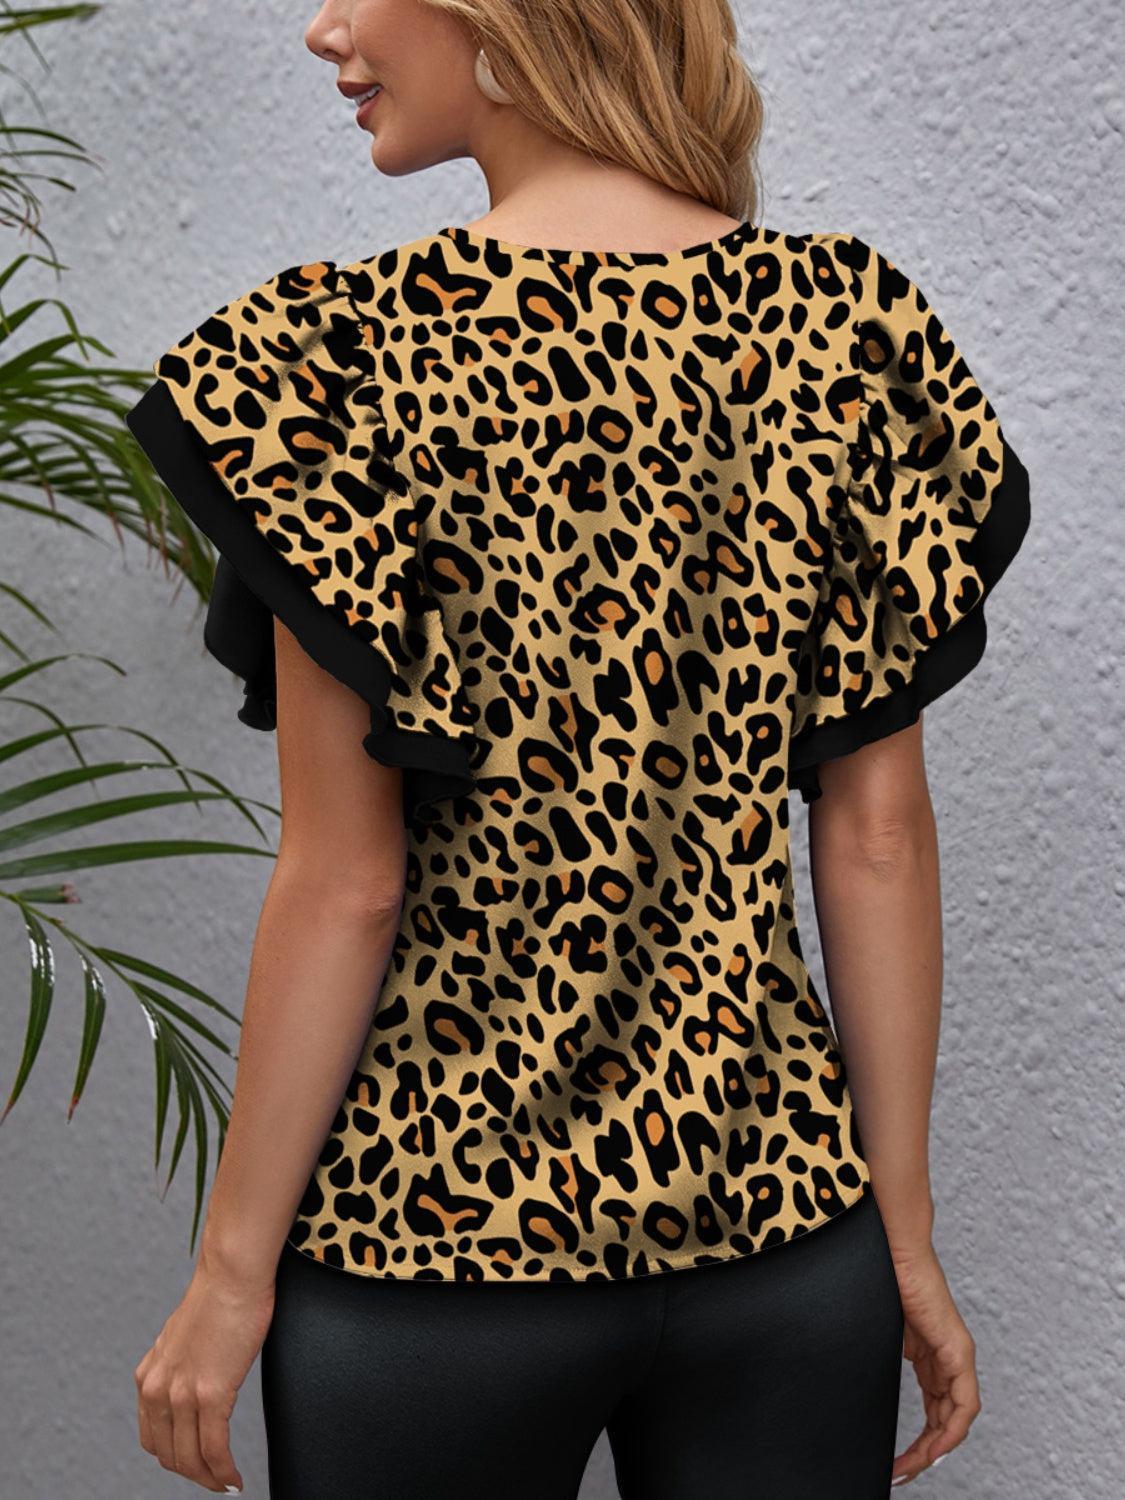 a woman wearing a leopard print top and black pants